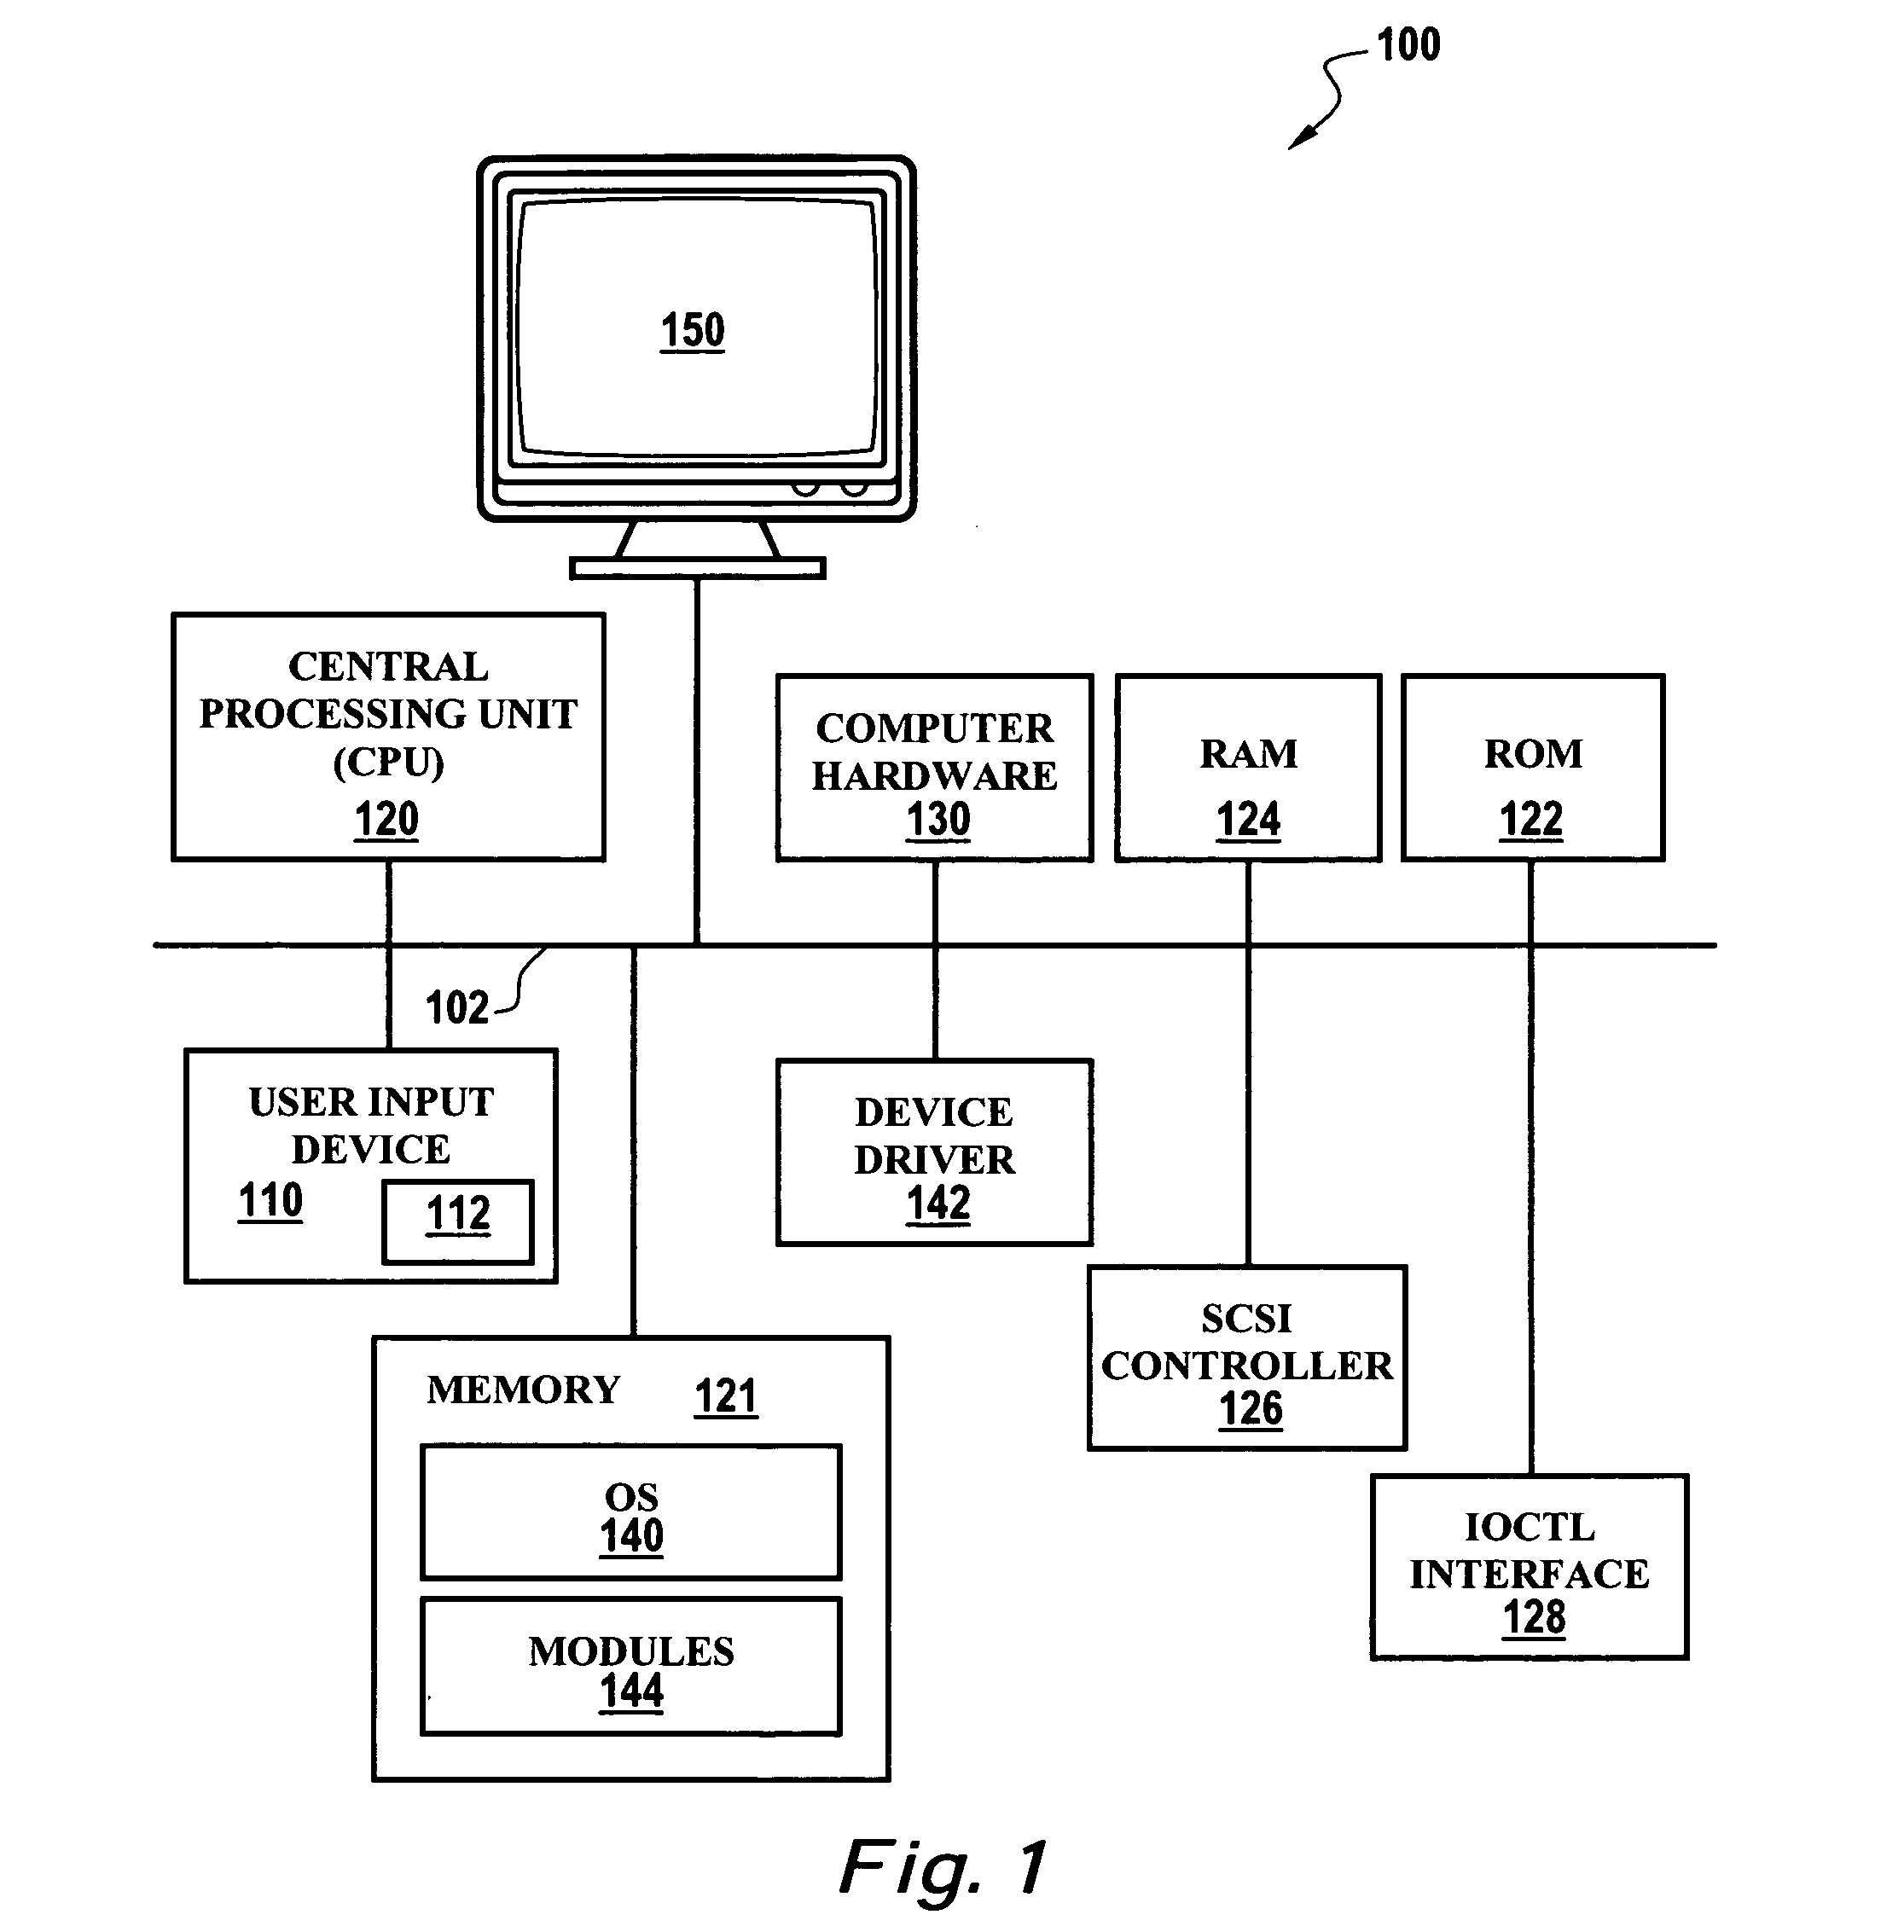 Methods and systems for unattended tracking of device transfer rates and reporting of performance degradation